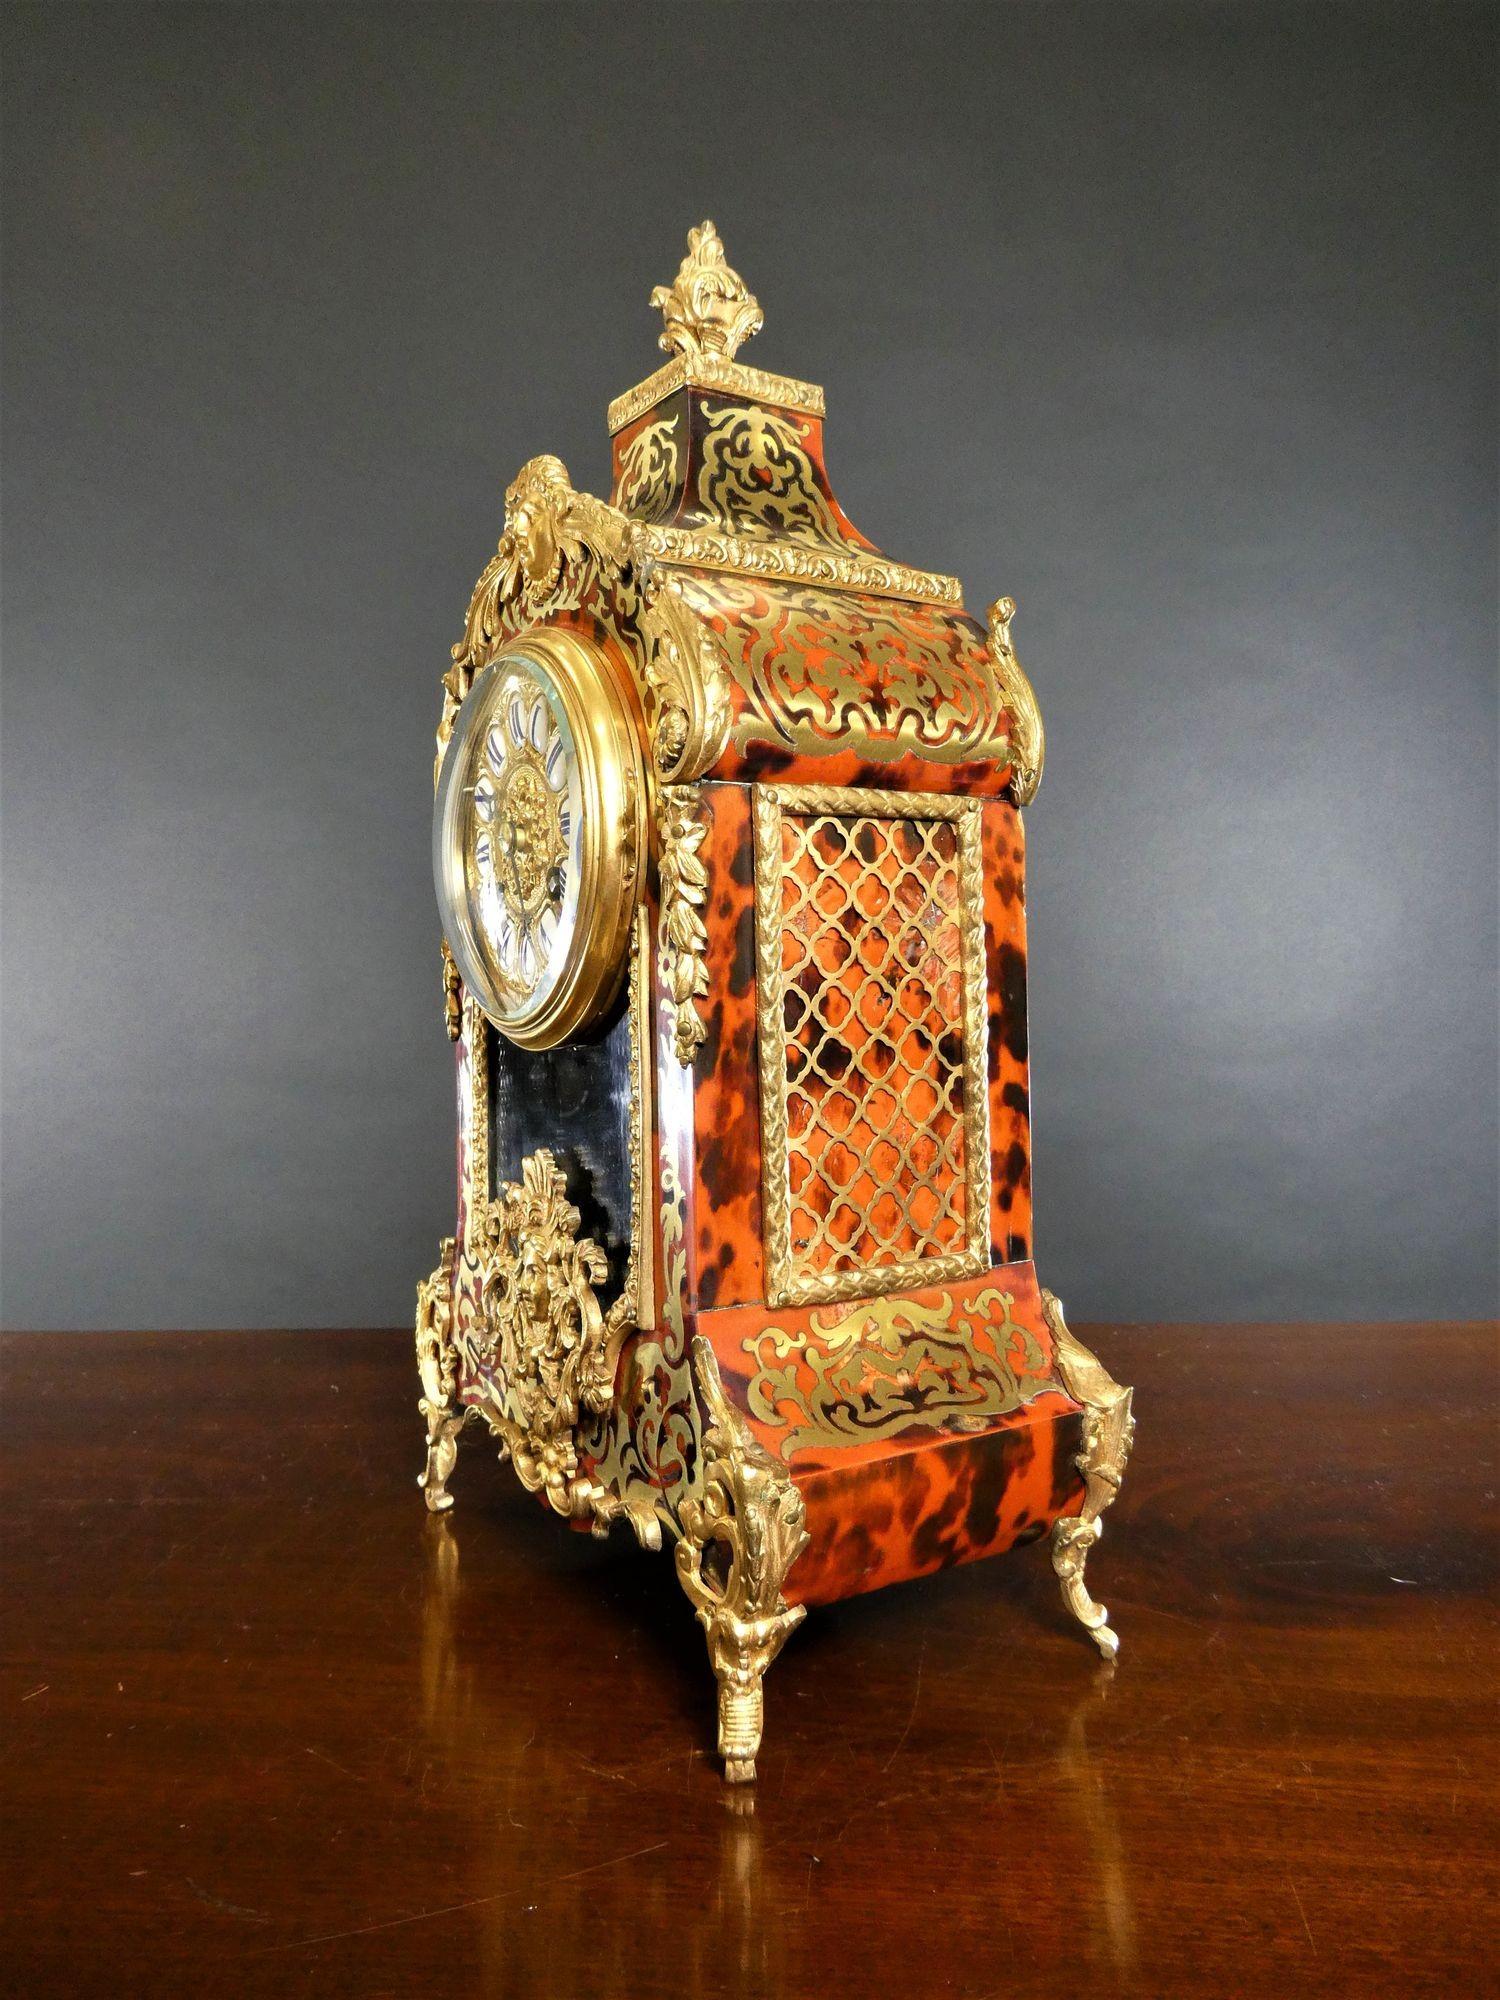 French Red Tortoiseshell Boulle clock, Samuel Marti, Paris.
 
Red tortoiseshell case inlaid with fine brass decoration surmounted by an ormolu finial, ormolu mounts and standing on raised bracket feet. The front of the case with glazed viewing